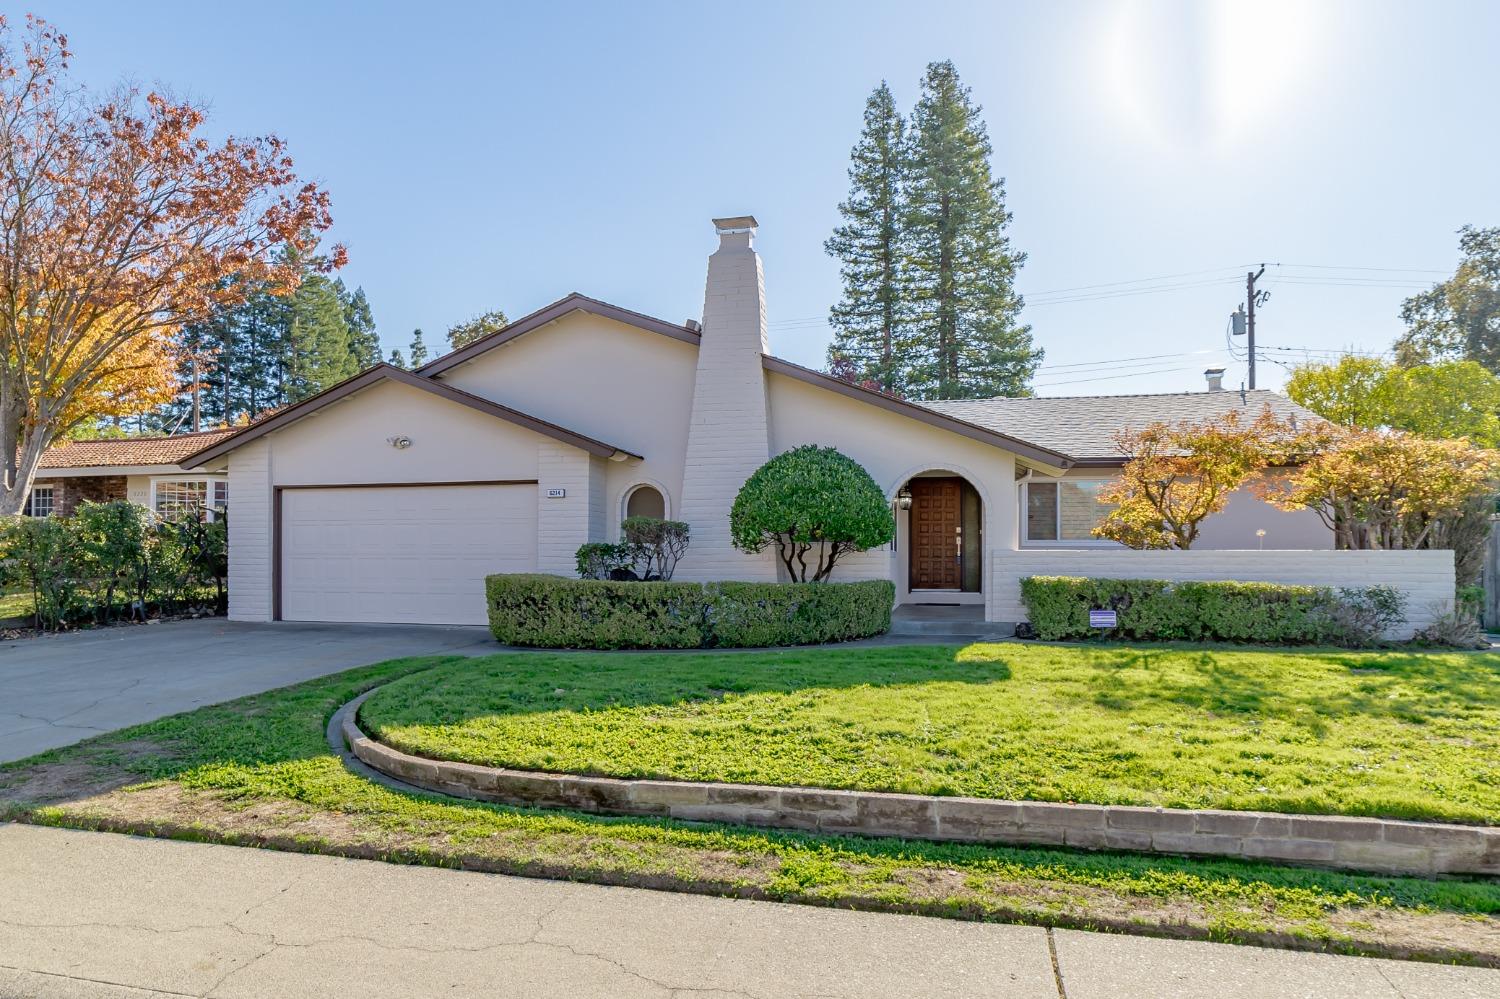 Photo of 6214 Mineral Wy in Carmichael, CA